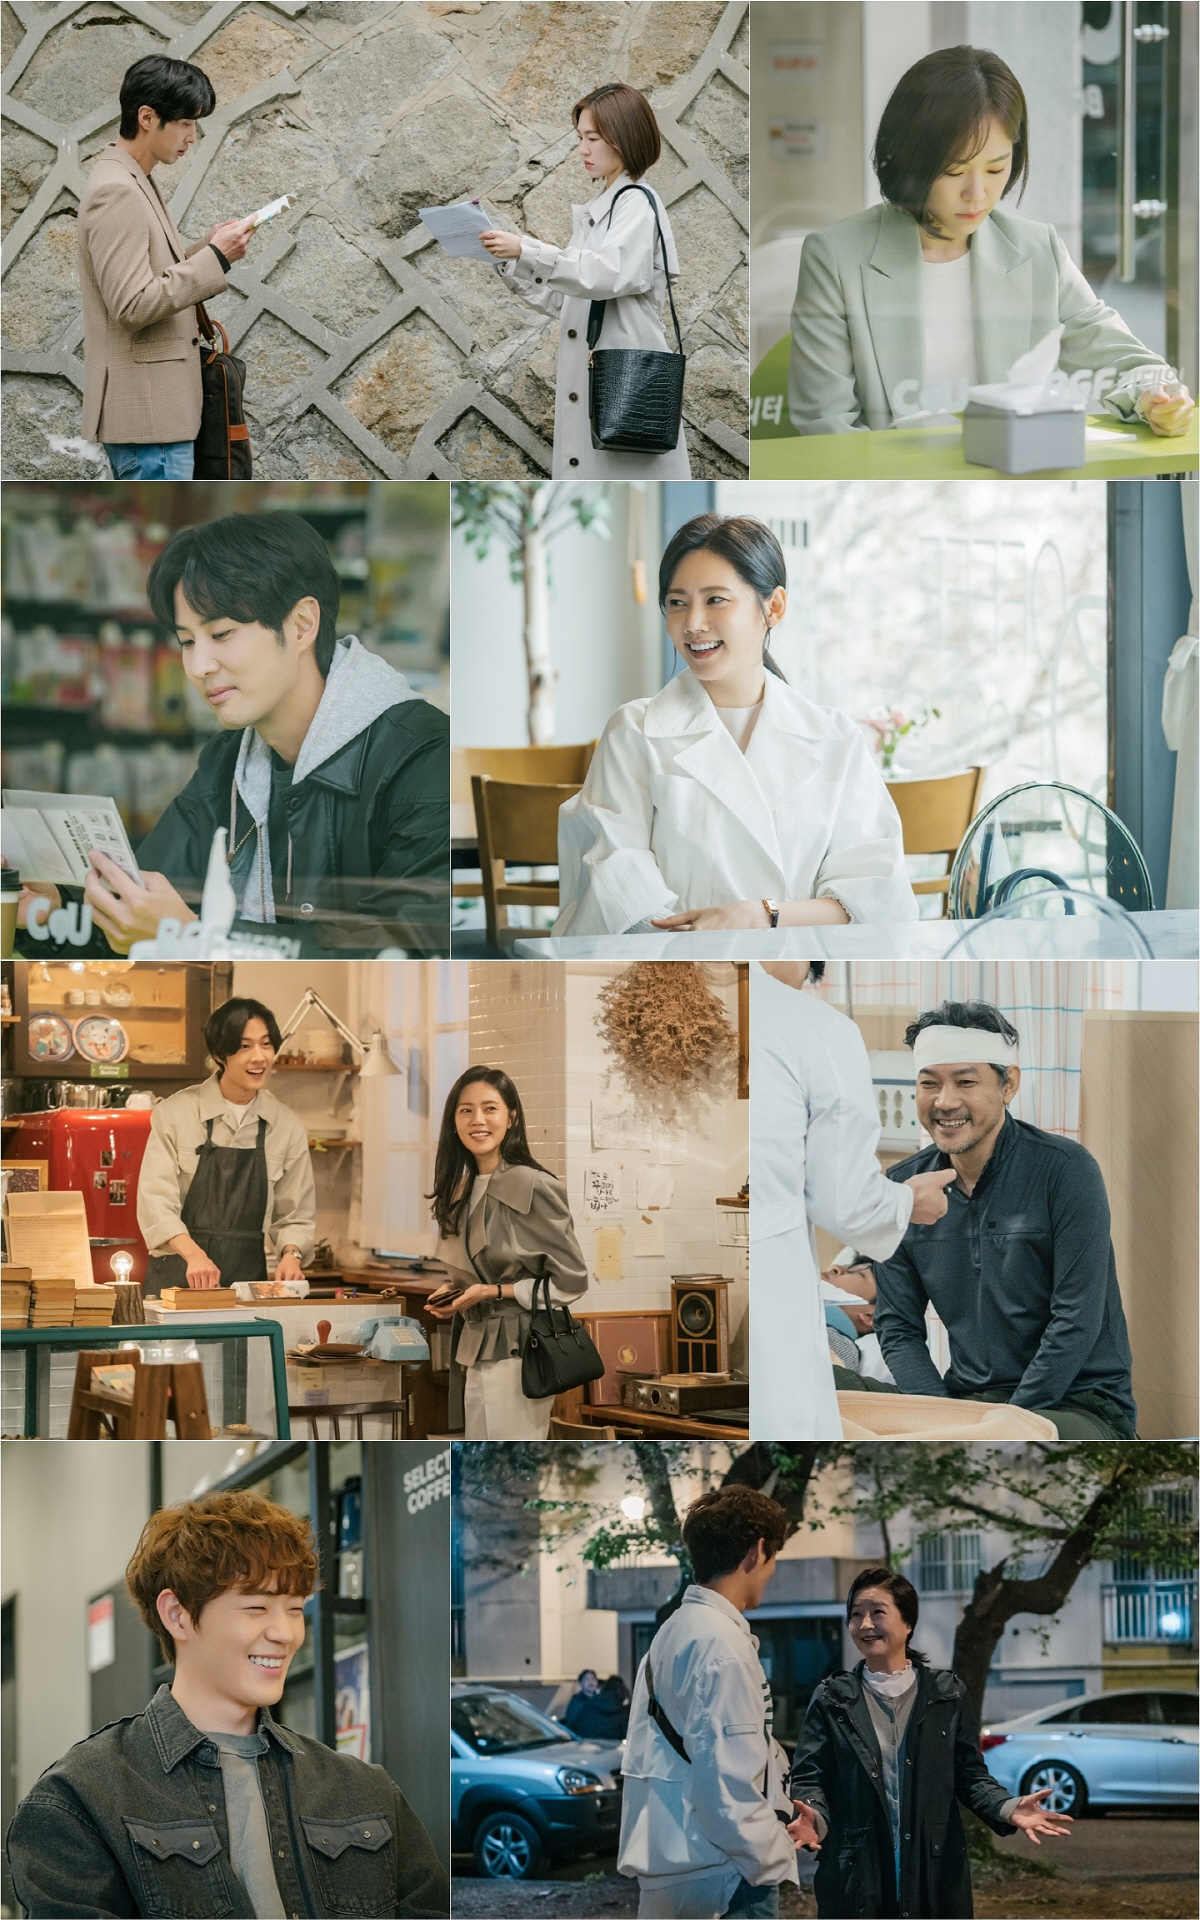 I do not know much, but Family. Is getting hot response every time with the power of actors who raise empathy and raise reality.TVN Mon-Tue drama I dont know much but Family. (director Kwon Young-il, playwright Kim Eun-jung, production studio Dragon/below, Family.) captivated the hearts of viewers with a single empathy that is pleasant but heartbreaking.It shows the true value of the hidden story and wounds of the family that are close but do not know.I am impressed by the misunderstanding that I have accumulated for a long time like a dusty dust, and the story of the family facing the wounds I did not know each other.The average audience rating of the last four times was 3.9% for households and 4.8% for the pay platform that integrates cable, IPTV and satellite, and it is gathering attention such as taking the top spot in the drama category in the content influence index (CPI) in the first week of June (June 1-June 7) released by CJ ENM.The powerful force that creates extraordinary empathy in ordinaryness lies in the Acting of Actors.Acting, which is a realistic and detailed change in the familys secrets, and the actors God act, which brings out their pain and weaves laughter and tears, attracted the audiences favorable reviews every day.In the behind-the-scenes photos released on the day, you can get a glimpse of the secrets that caused emotional synchronization regardless of generation.Yeri Han and Kim Ji-seok, who are loved by viewers for 15 years, are concentrating on the script until just before shooting.Yeri Han and Kim Ji-seok are keen to immerse themselves in not missing anything because they are melted into emotions that can not be said in realistic lines.The synergy of actors who are no different from real families is also the driving force behind Family. as the best Acting Good Restaurant.Choo Ja-hyuns reversal charm, which has turned into a smile angel after taking off his cool Kim Eun-joo, catches his attention.Jung Jin-young, who leads the scene atmosphere smoothly with a bright smile, is receiving absolute support from viewers by creating a pink Kim Sang-sik character that can not be hated by returning to the memory of 22 years old.In the ensuing photo, the affectionate hat Won Mi-kyung and Shin Jae-ha are also noticeable.The perfect breathing of Actors, who have created their own life-catch by adding empathy, makes the story more anticipated in the future.Kim Eun-hee, who has lived with consideration for others but did not know about I and family, added depth to the wide range of acting by Yeri Han.Kim Ji-seok maximized the charm of Park Chan-hyuk, a realistic and friendly Nam Sachin.Above all, Kim Eun-hees unexpected entanglement with his family added to his curiosity about his future activities.Choo Ja-hyun of Kim Eun-joo, who is cold but cares for his family more than anyone else, succeeded in detailing the complex feelings.Choo Ja-hyuns understated act made me look closely at the heart and wounds hidden under indifferent eyes.This is why Kim Eun-joos hidden story and change facing the secret of Yoon Tae-hyung (Kim Tae-hoon) is curious.Jung Jin-young and Won Mi-kyung have increased their empathy by taking even the years that the couple have accumulated.Jung Jin-young created a character that was unprecedented in his patriarchal husband, going to and from his wife-only lover.Won Mi-kyung also tapped the hearts of viewers by drawing the inner side of mother Lee Jin-sook authentically.Shin Jae-ha of Kim Ji-woo, an atmosphere maker, has revitalized with lively acting.Family. is realistically depicting our characters, which are not special, ordinary figures, as the executive producer of Family.Acting, which is full of reality of actors, plays a big role in delivering various emotions.It is like my story, and viewers seem to sympathize more with characters and stories. I do not want to break the peace, so the uncomfortable point that I did not touch is bursting, and the conflict begins to change and the relationship begins to change.If the secret of the family that bursts without rest until the fourth part made it fun to see the case, the emotions of each person who responds to the unexpected event are now unfolded.It will be fun to watch Actors famous activities. Meanwhile, tvN Mon-Tue drama I dont know much but Family. airs today (15th) at 9 p.m.